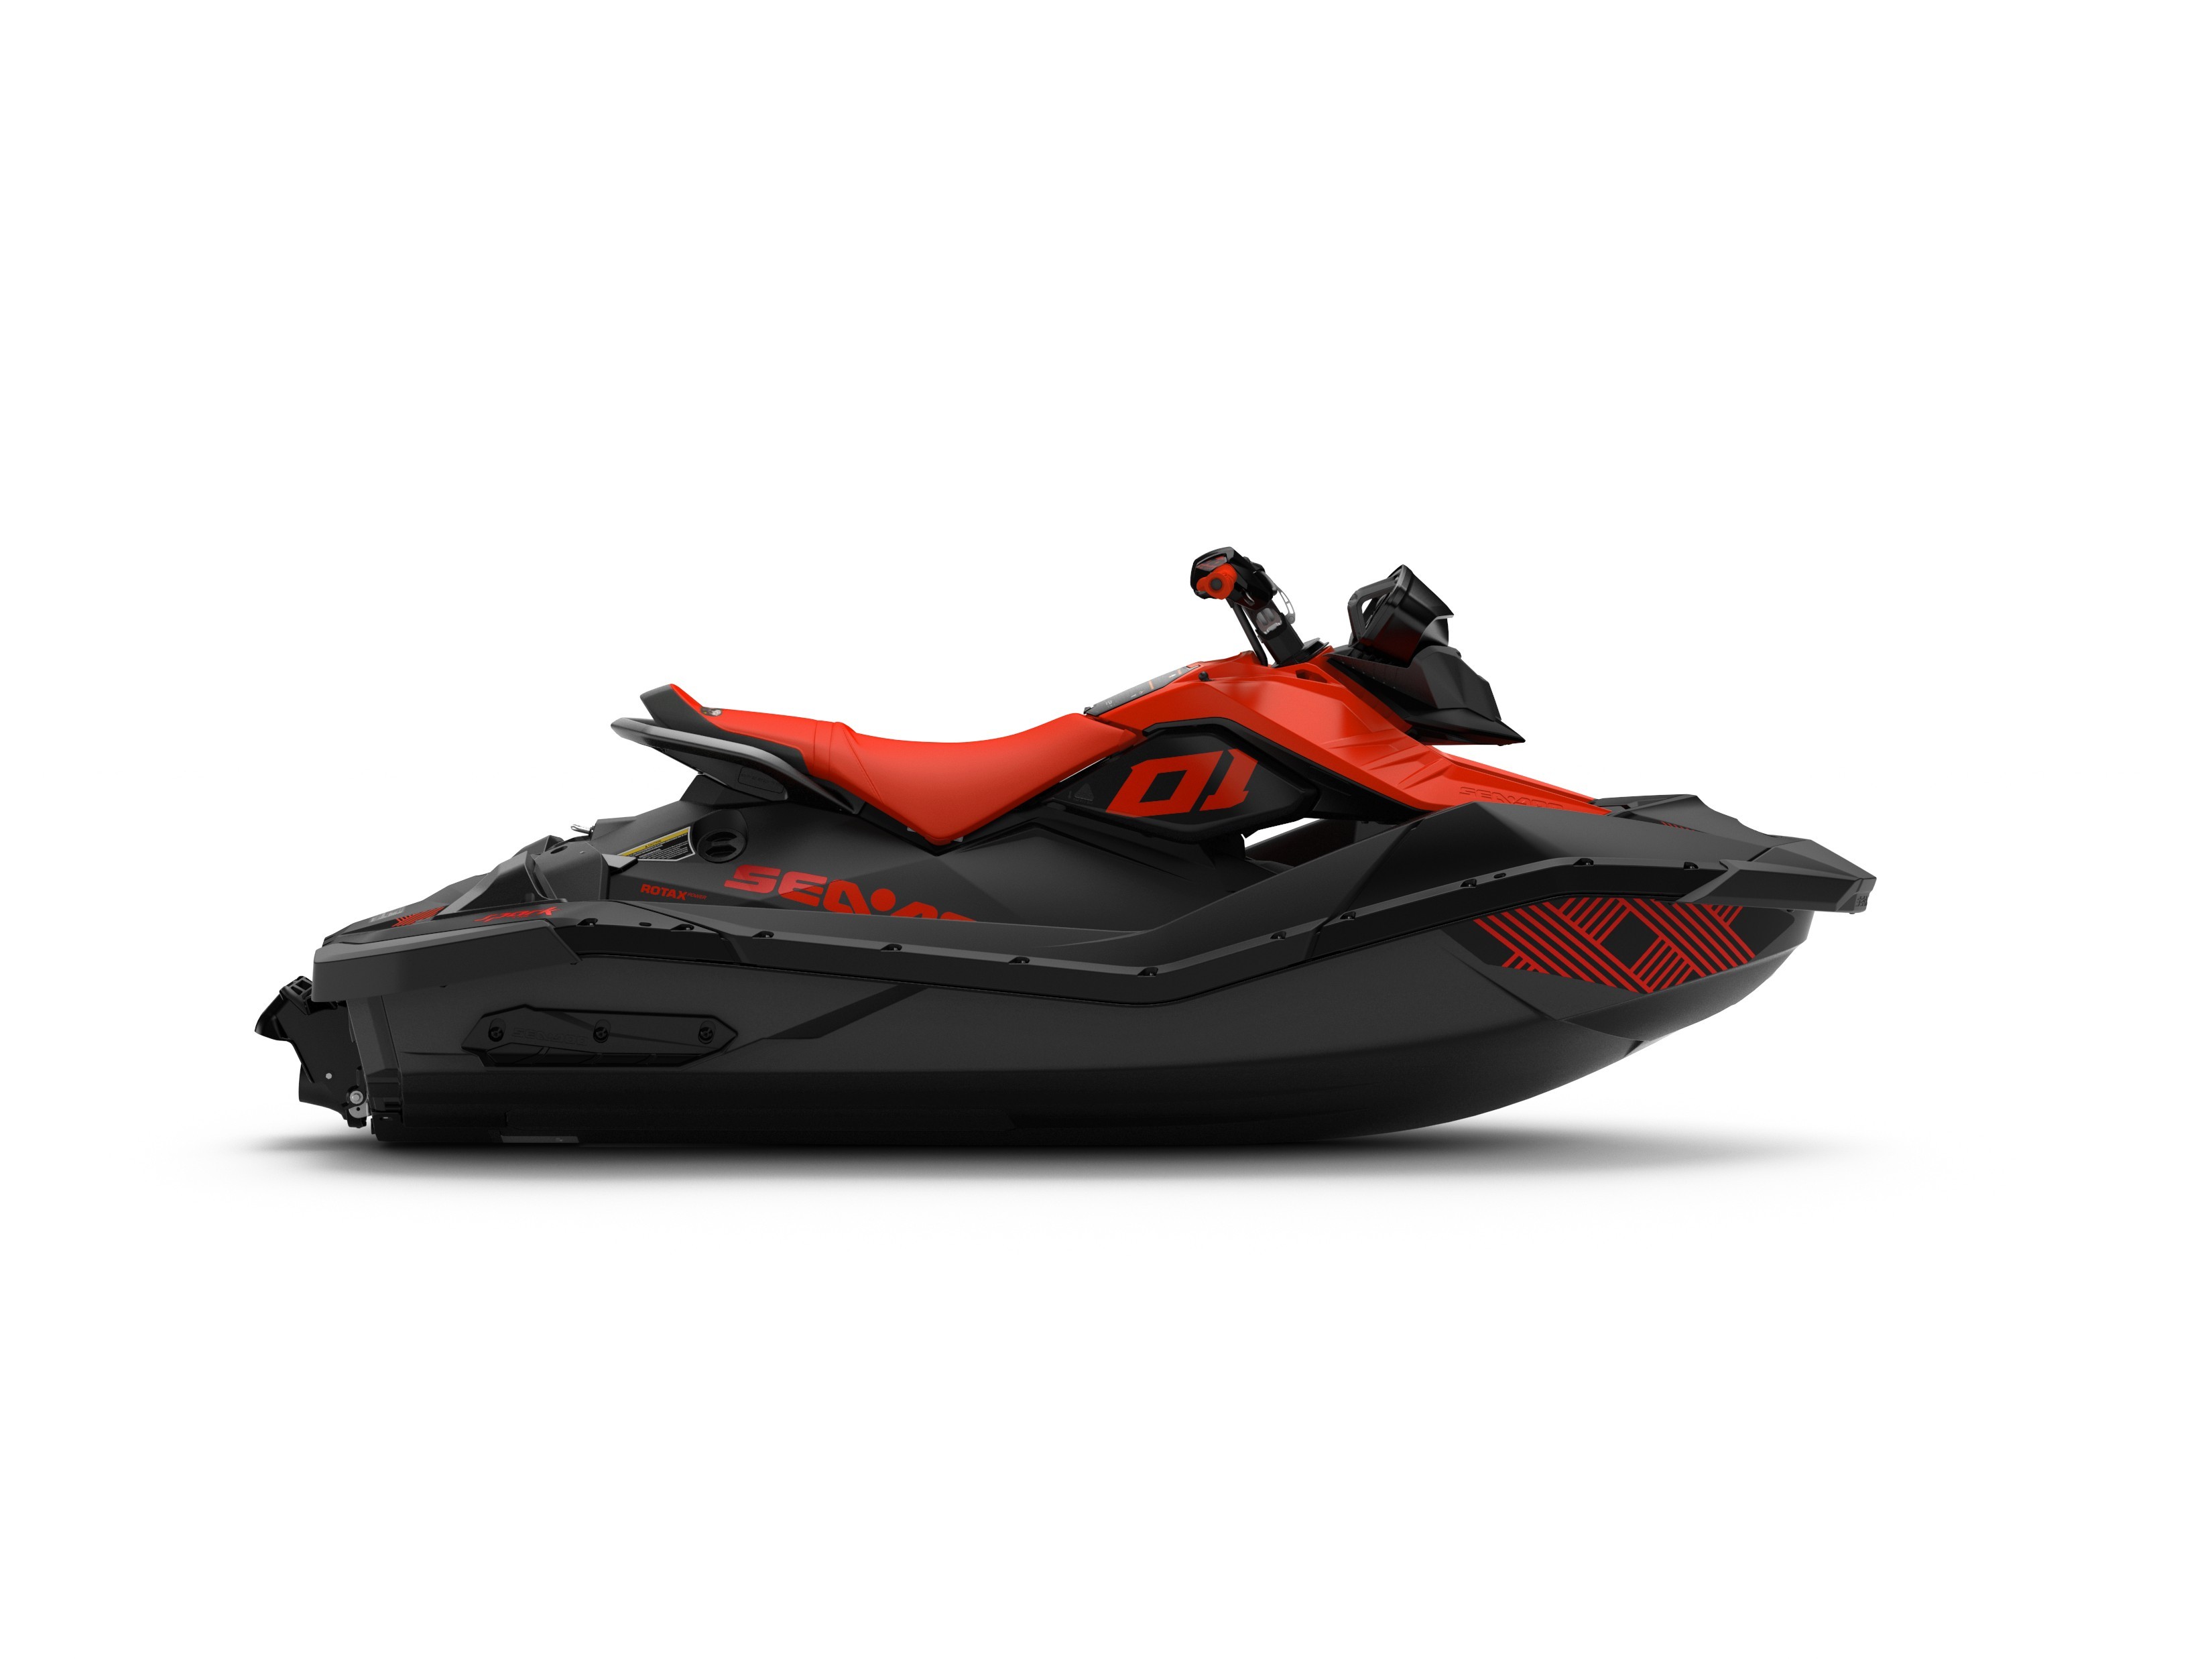  WATERSPORTS SEA-DOO_IMAGERY REC_LITE MY22 SEA-MY22-SPARK-2up-IBR-TRIXX-SS-90-Can-Am-Red-SKU00065NE00-Studio-RSide-NA-3300x2475